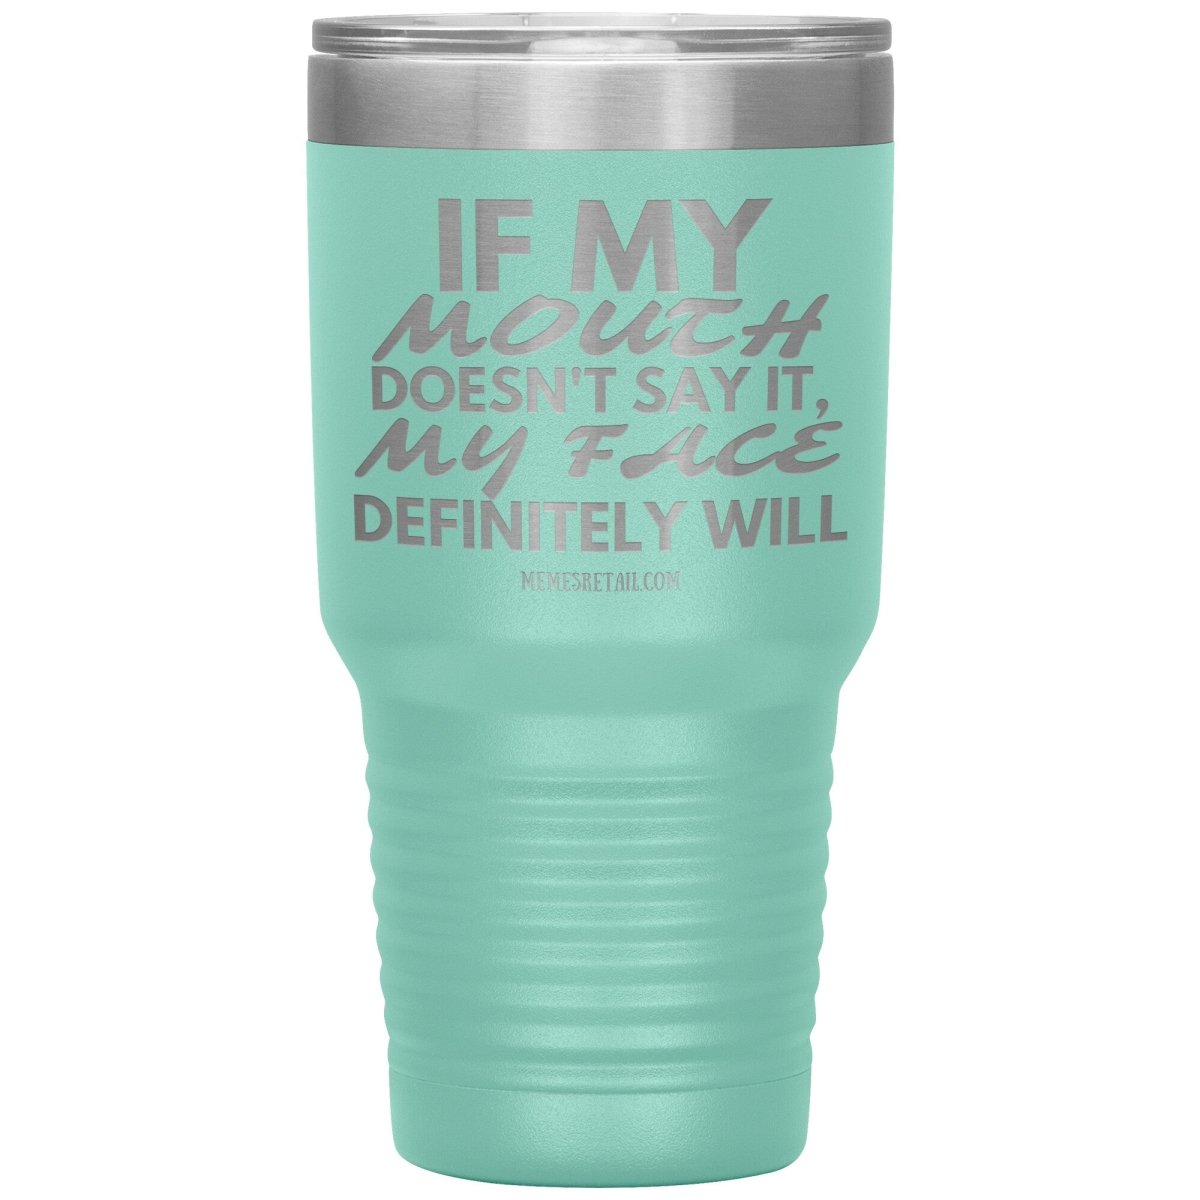 If my mouth doesn't say it, my face definitely will Tumblers, 30oz Insulated Tumbler / Teal - MemesRetail.com